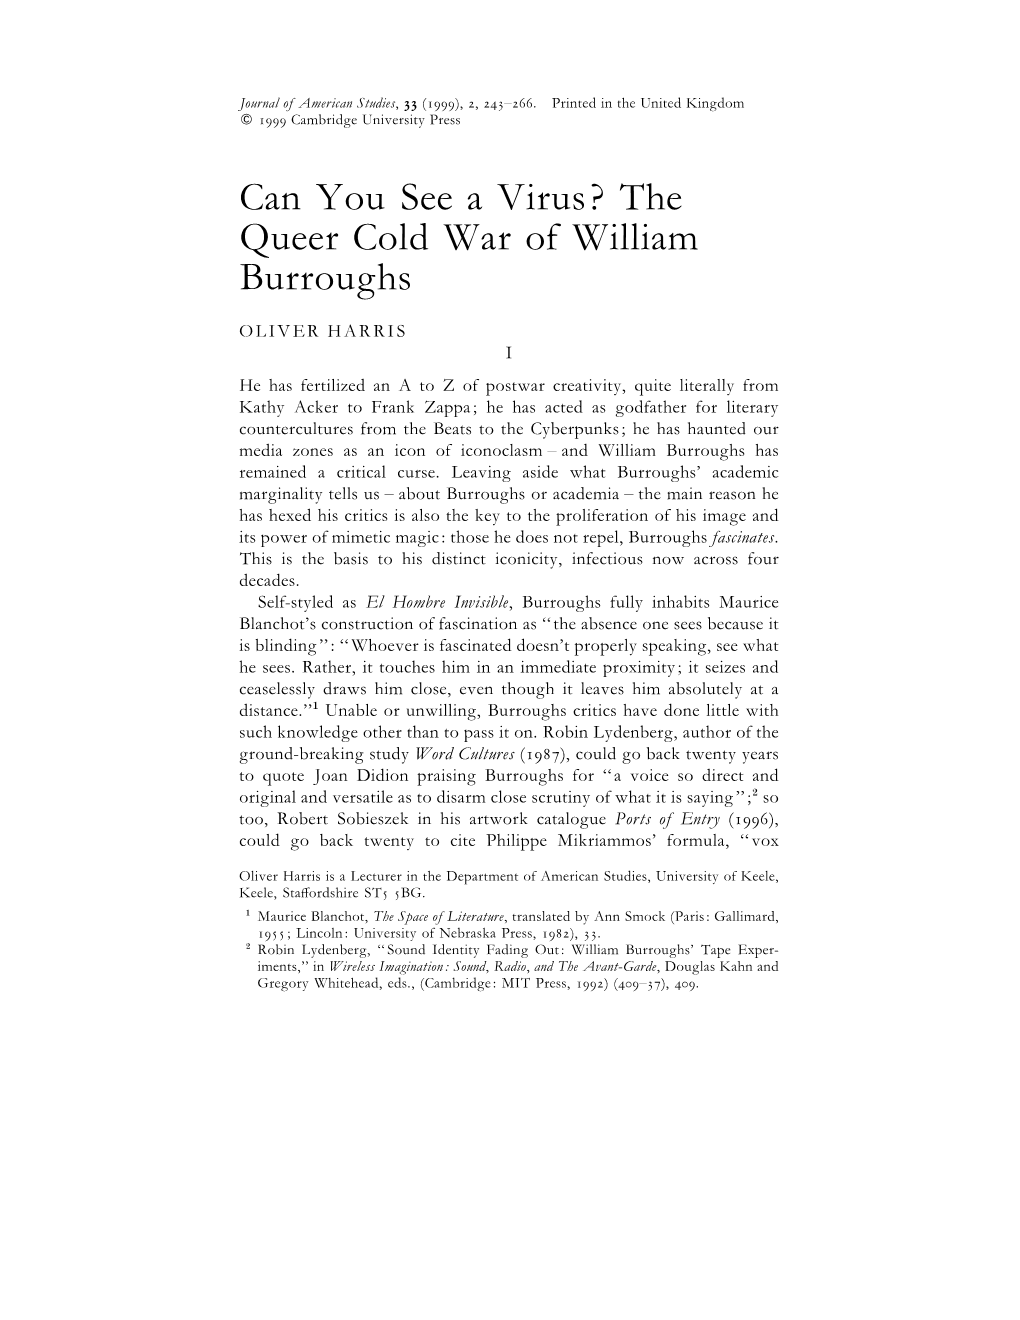 Can You See a Virus? the Queer Cold War of William Burroughs